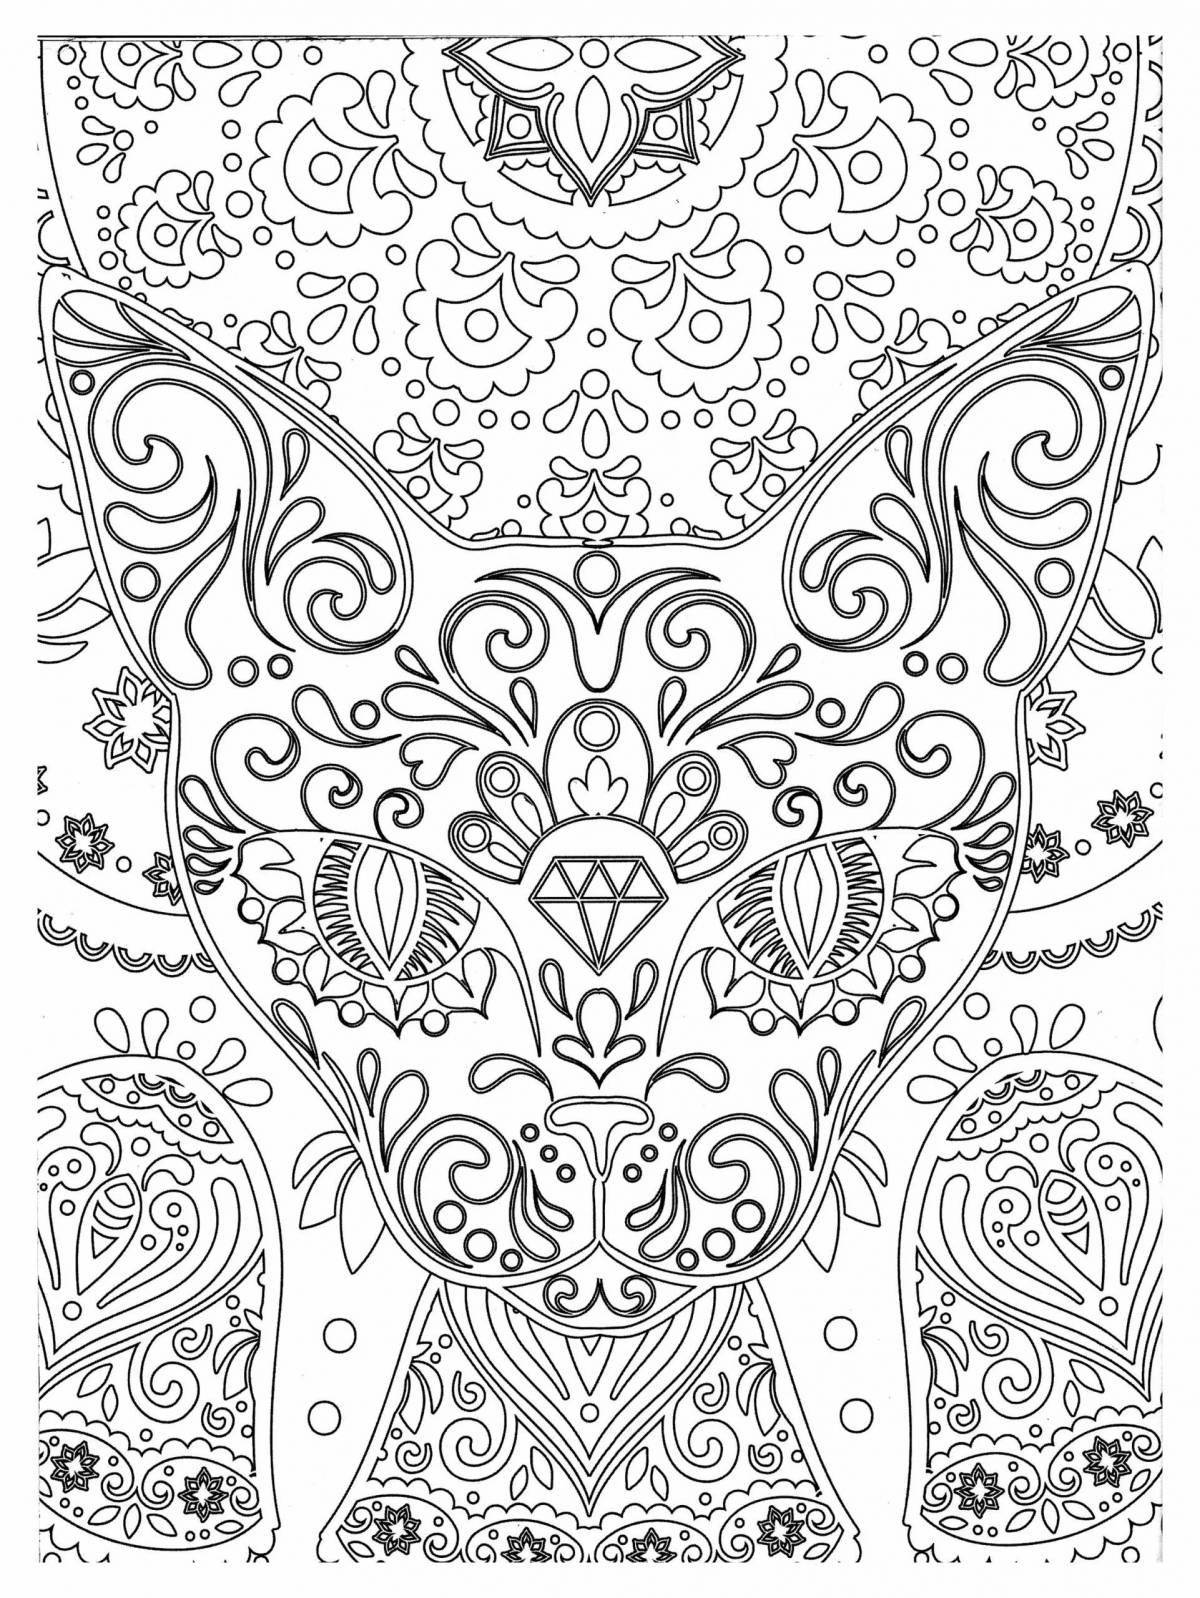 Soothing coloring pages